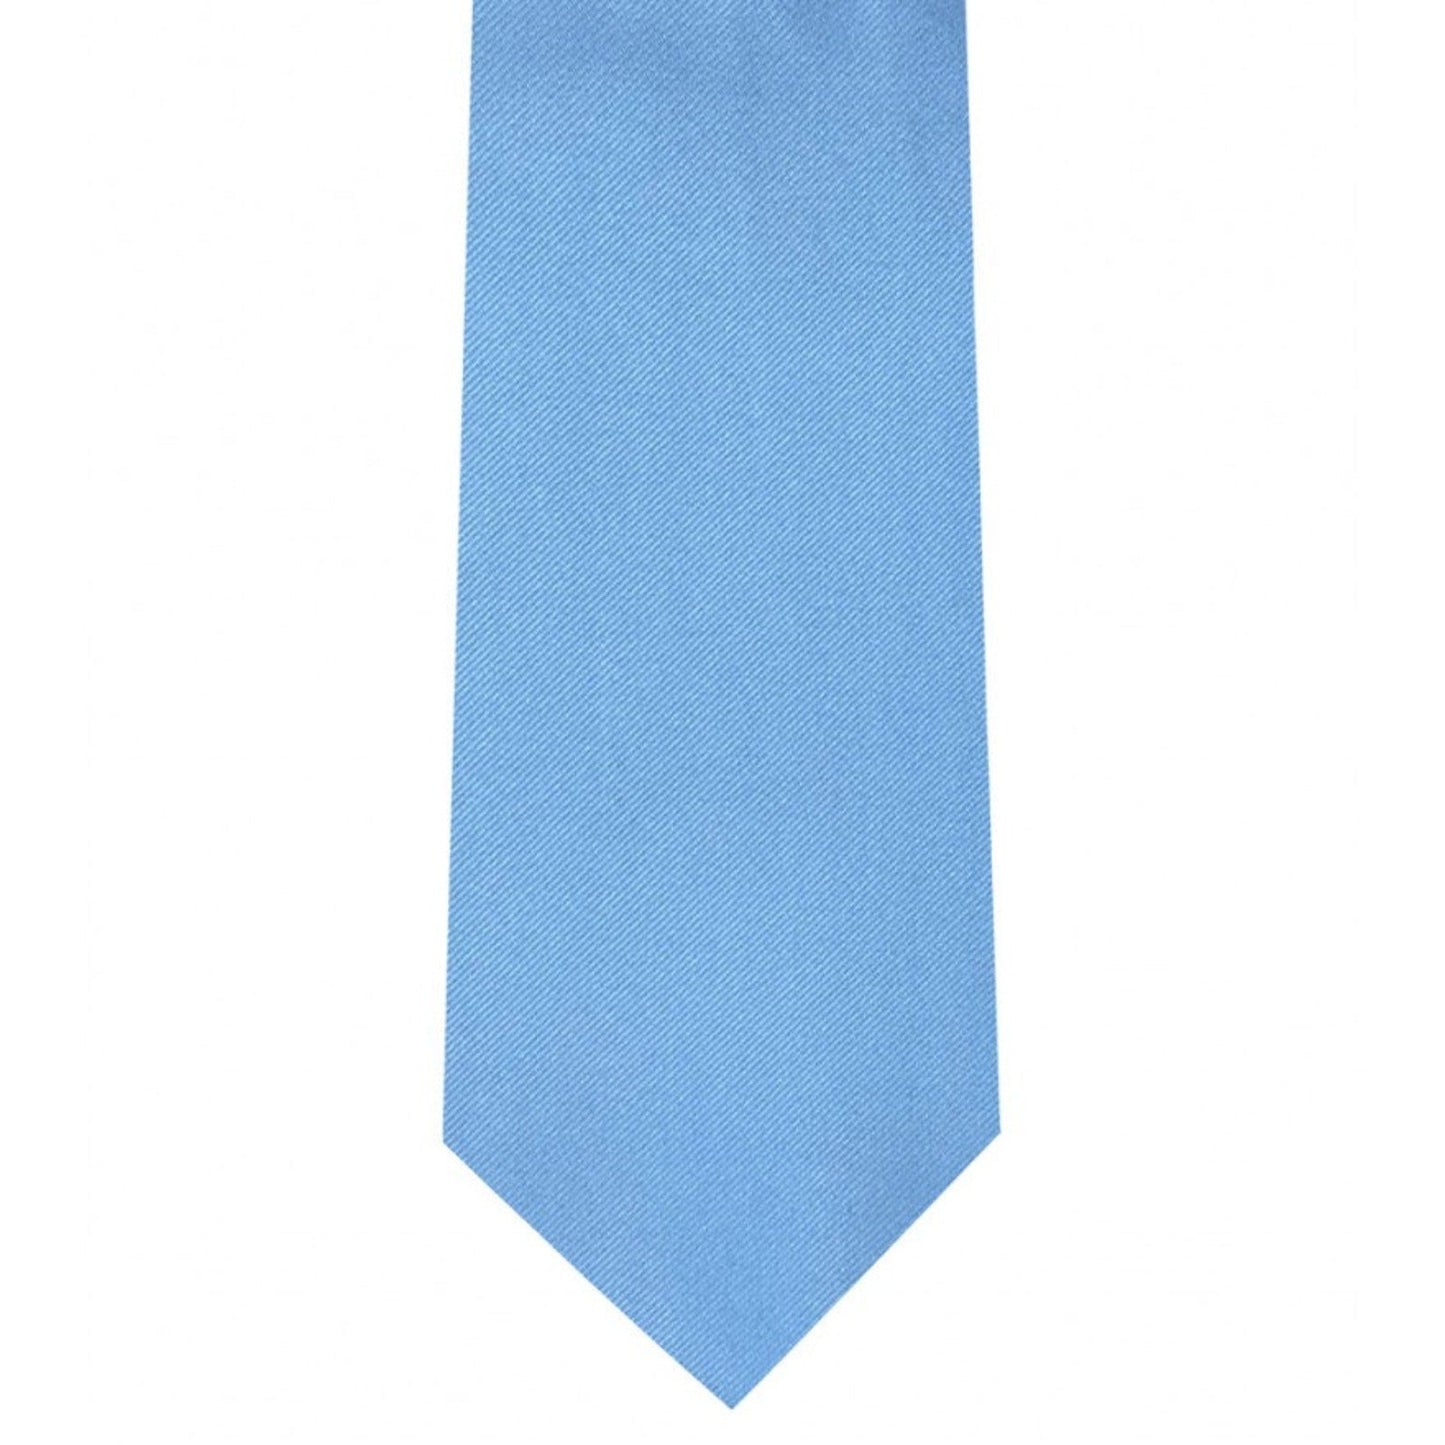 Classic Baby Blue Tie Ultra Skinny tie width 2.25 inches With Matching Pocket Square | KCT Menswear